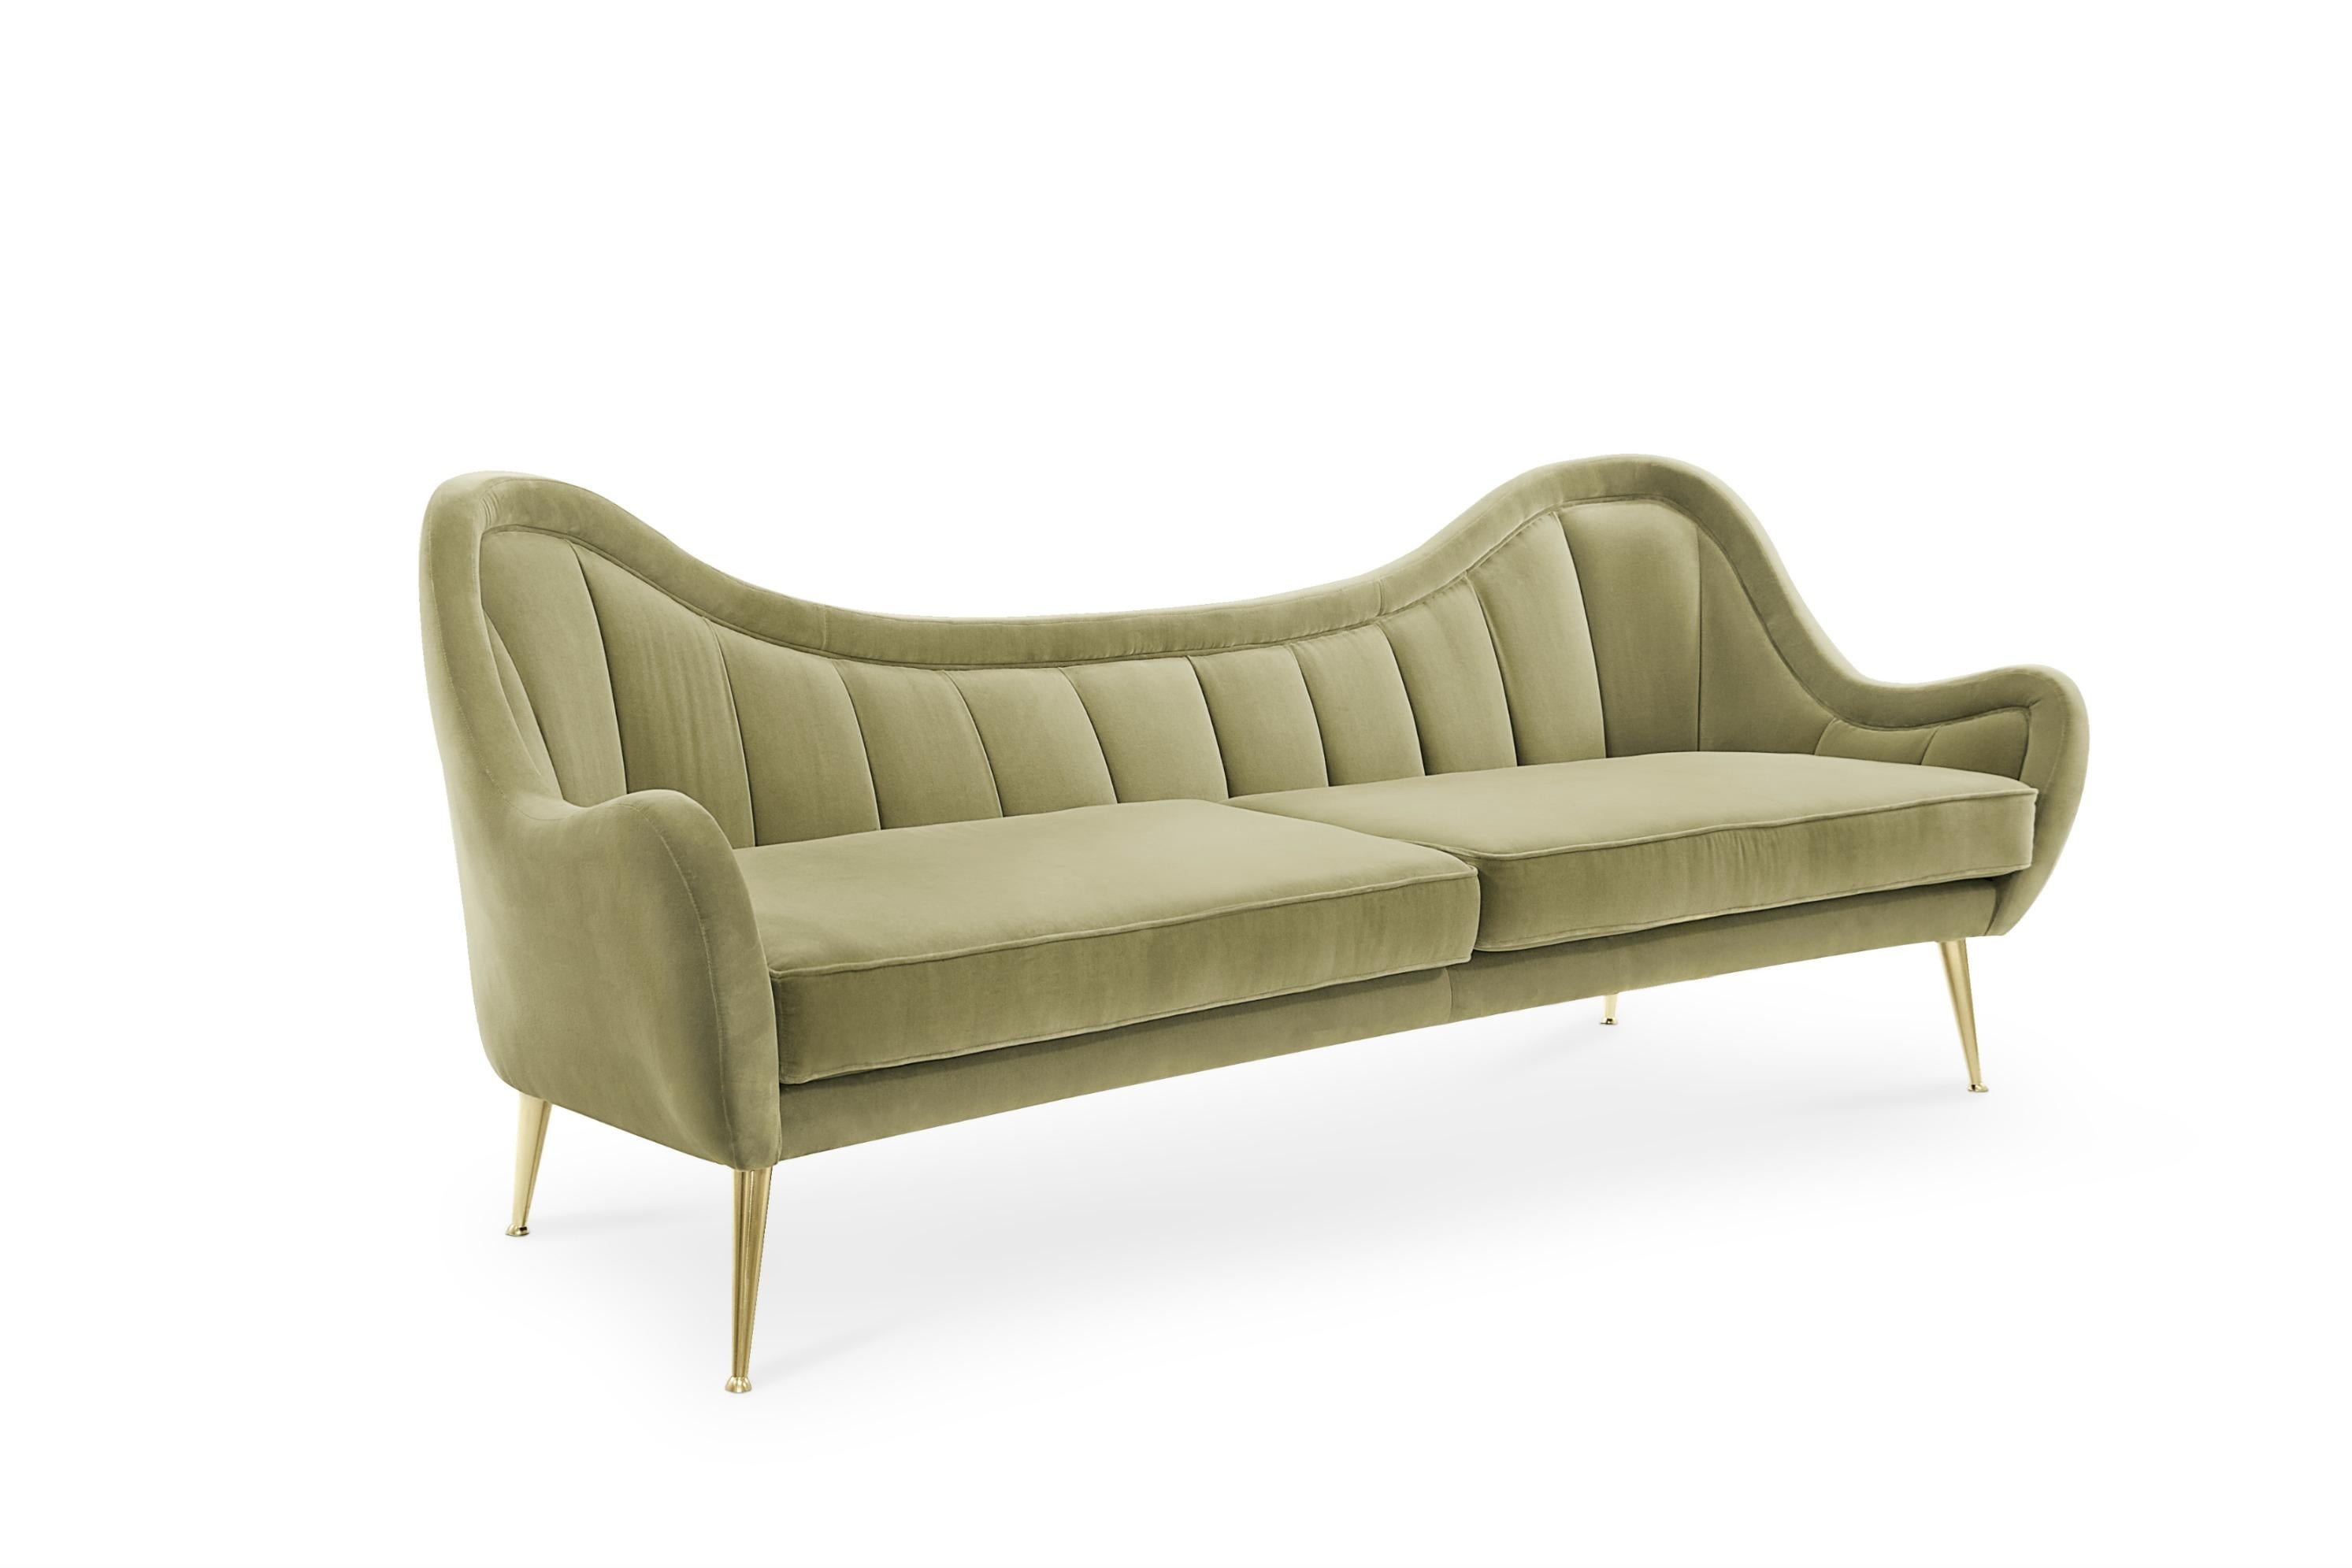 In Greek Mythology, Hermes is the God of boundaries, travel and communication. This was the inspiration behind HERMES Sofa, a living room sofa upholstered in cotton velvet and legs in polished brass. It is a statement mid century modern sofa capable